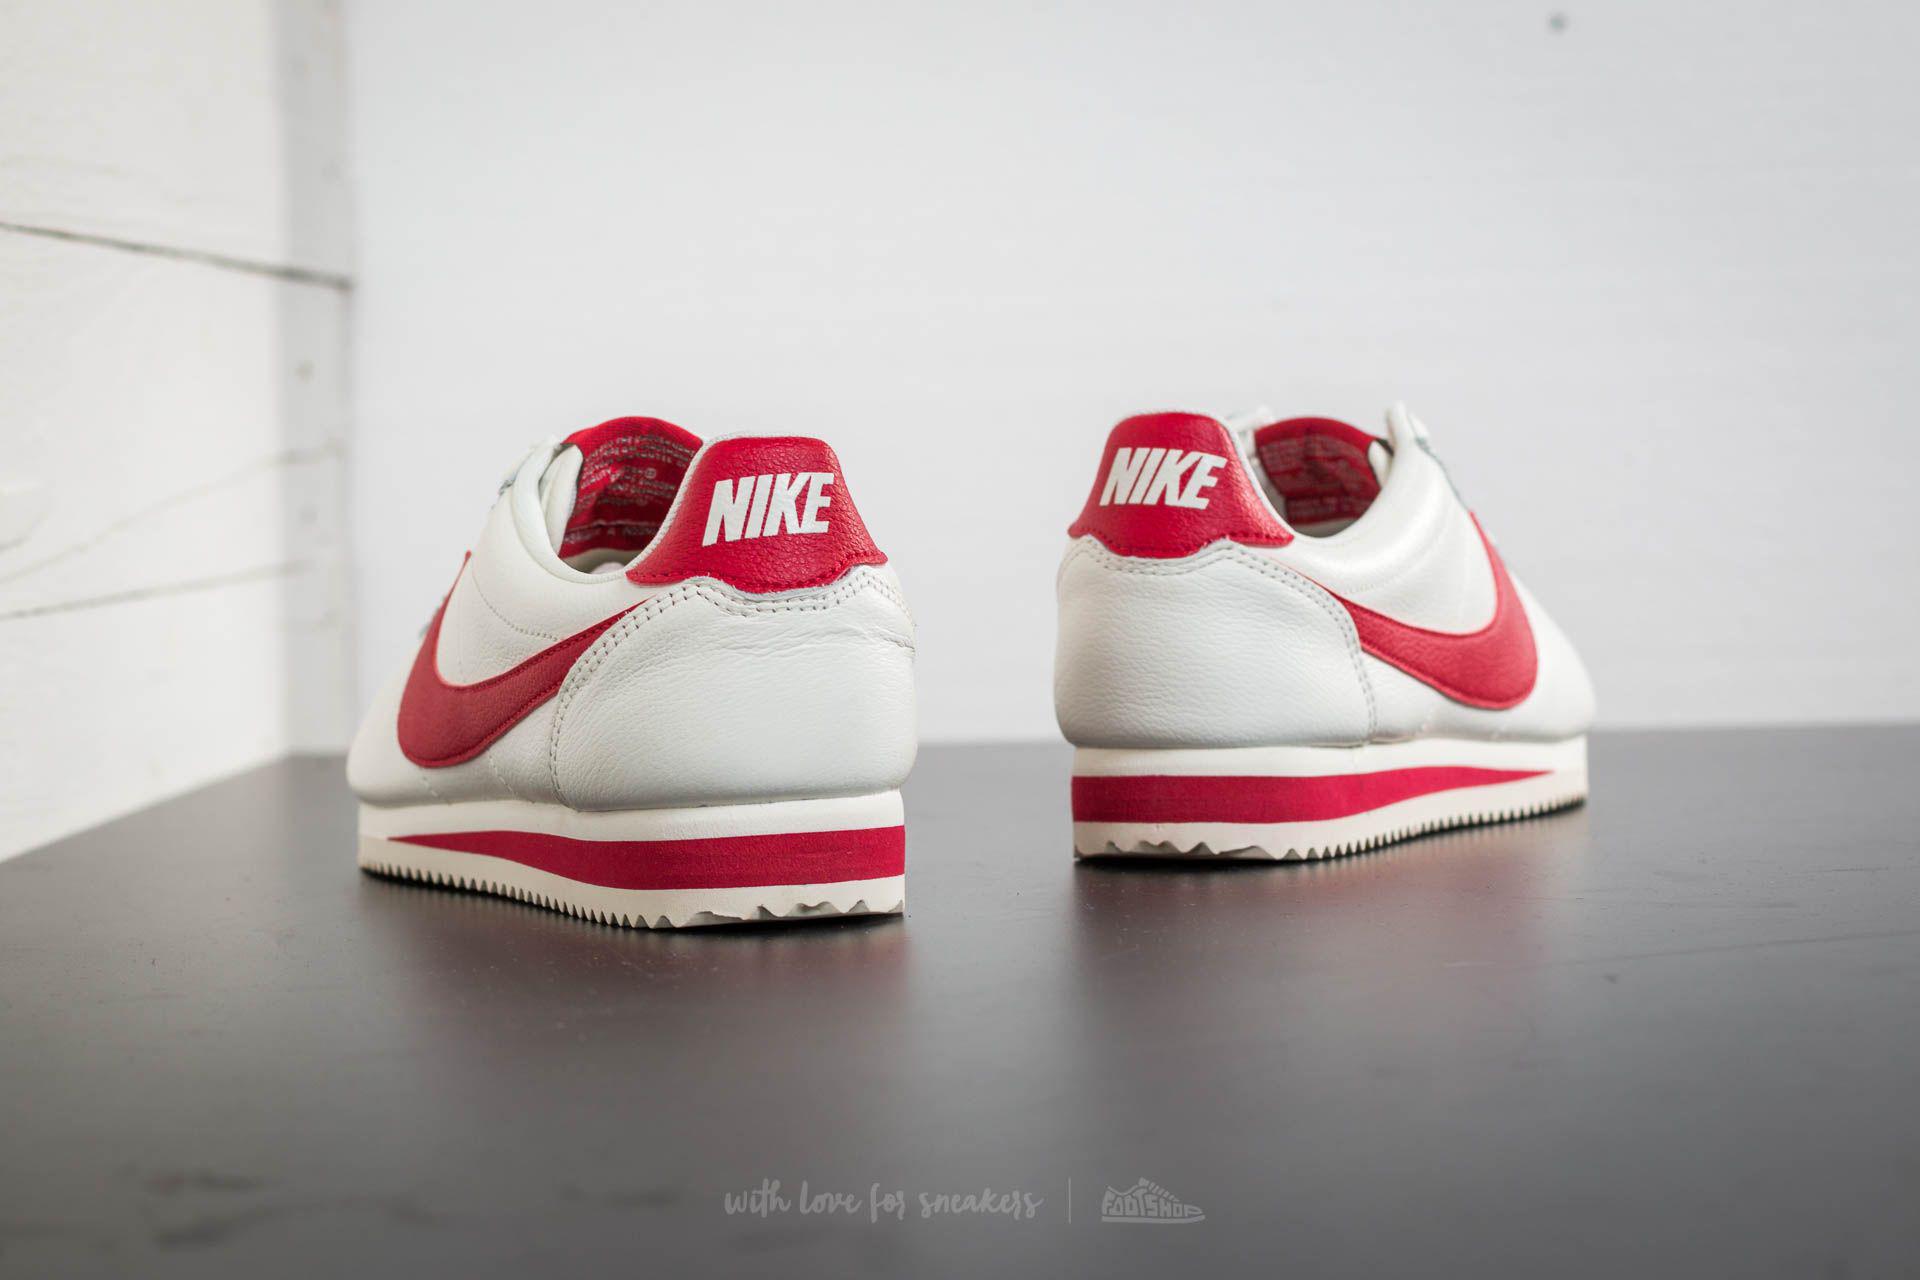 Nike Classic Cortez Leather Se Sail/ Gym Red for Men - Lyst